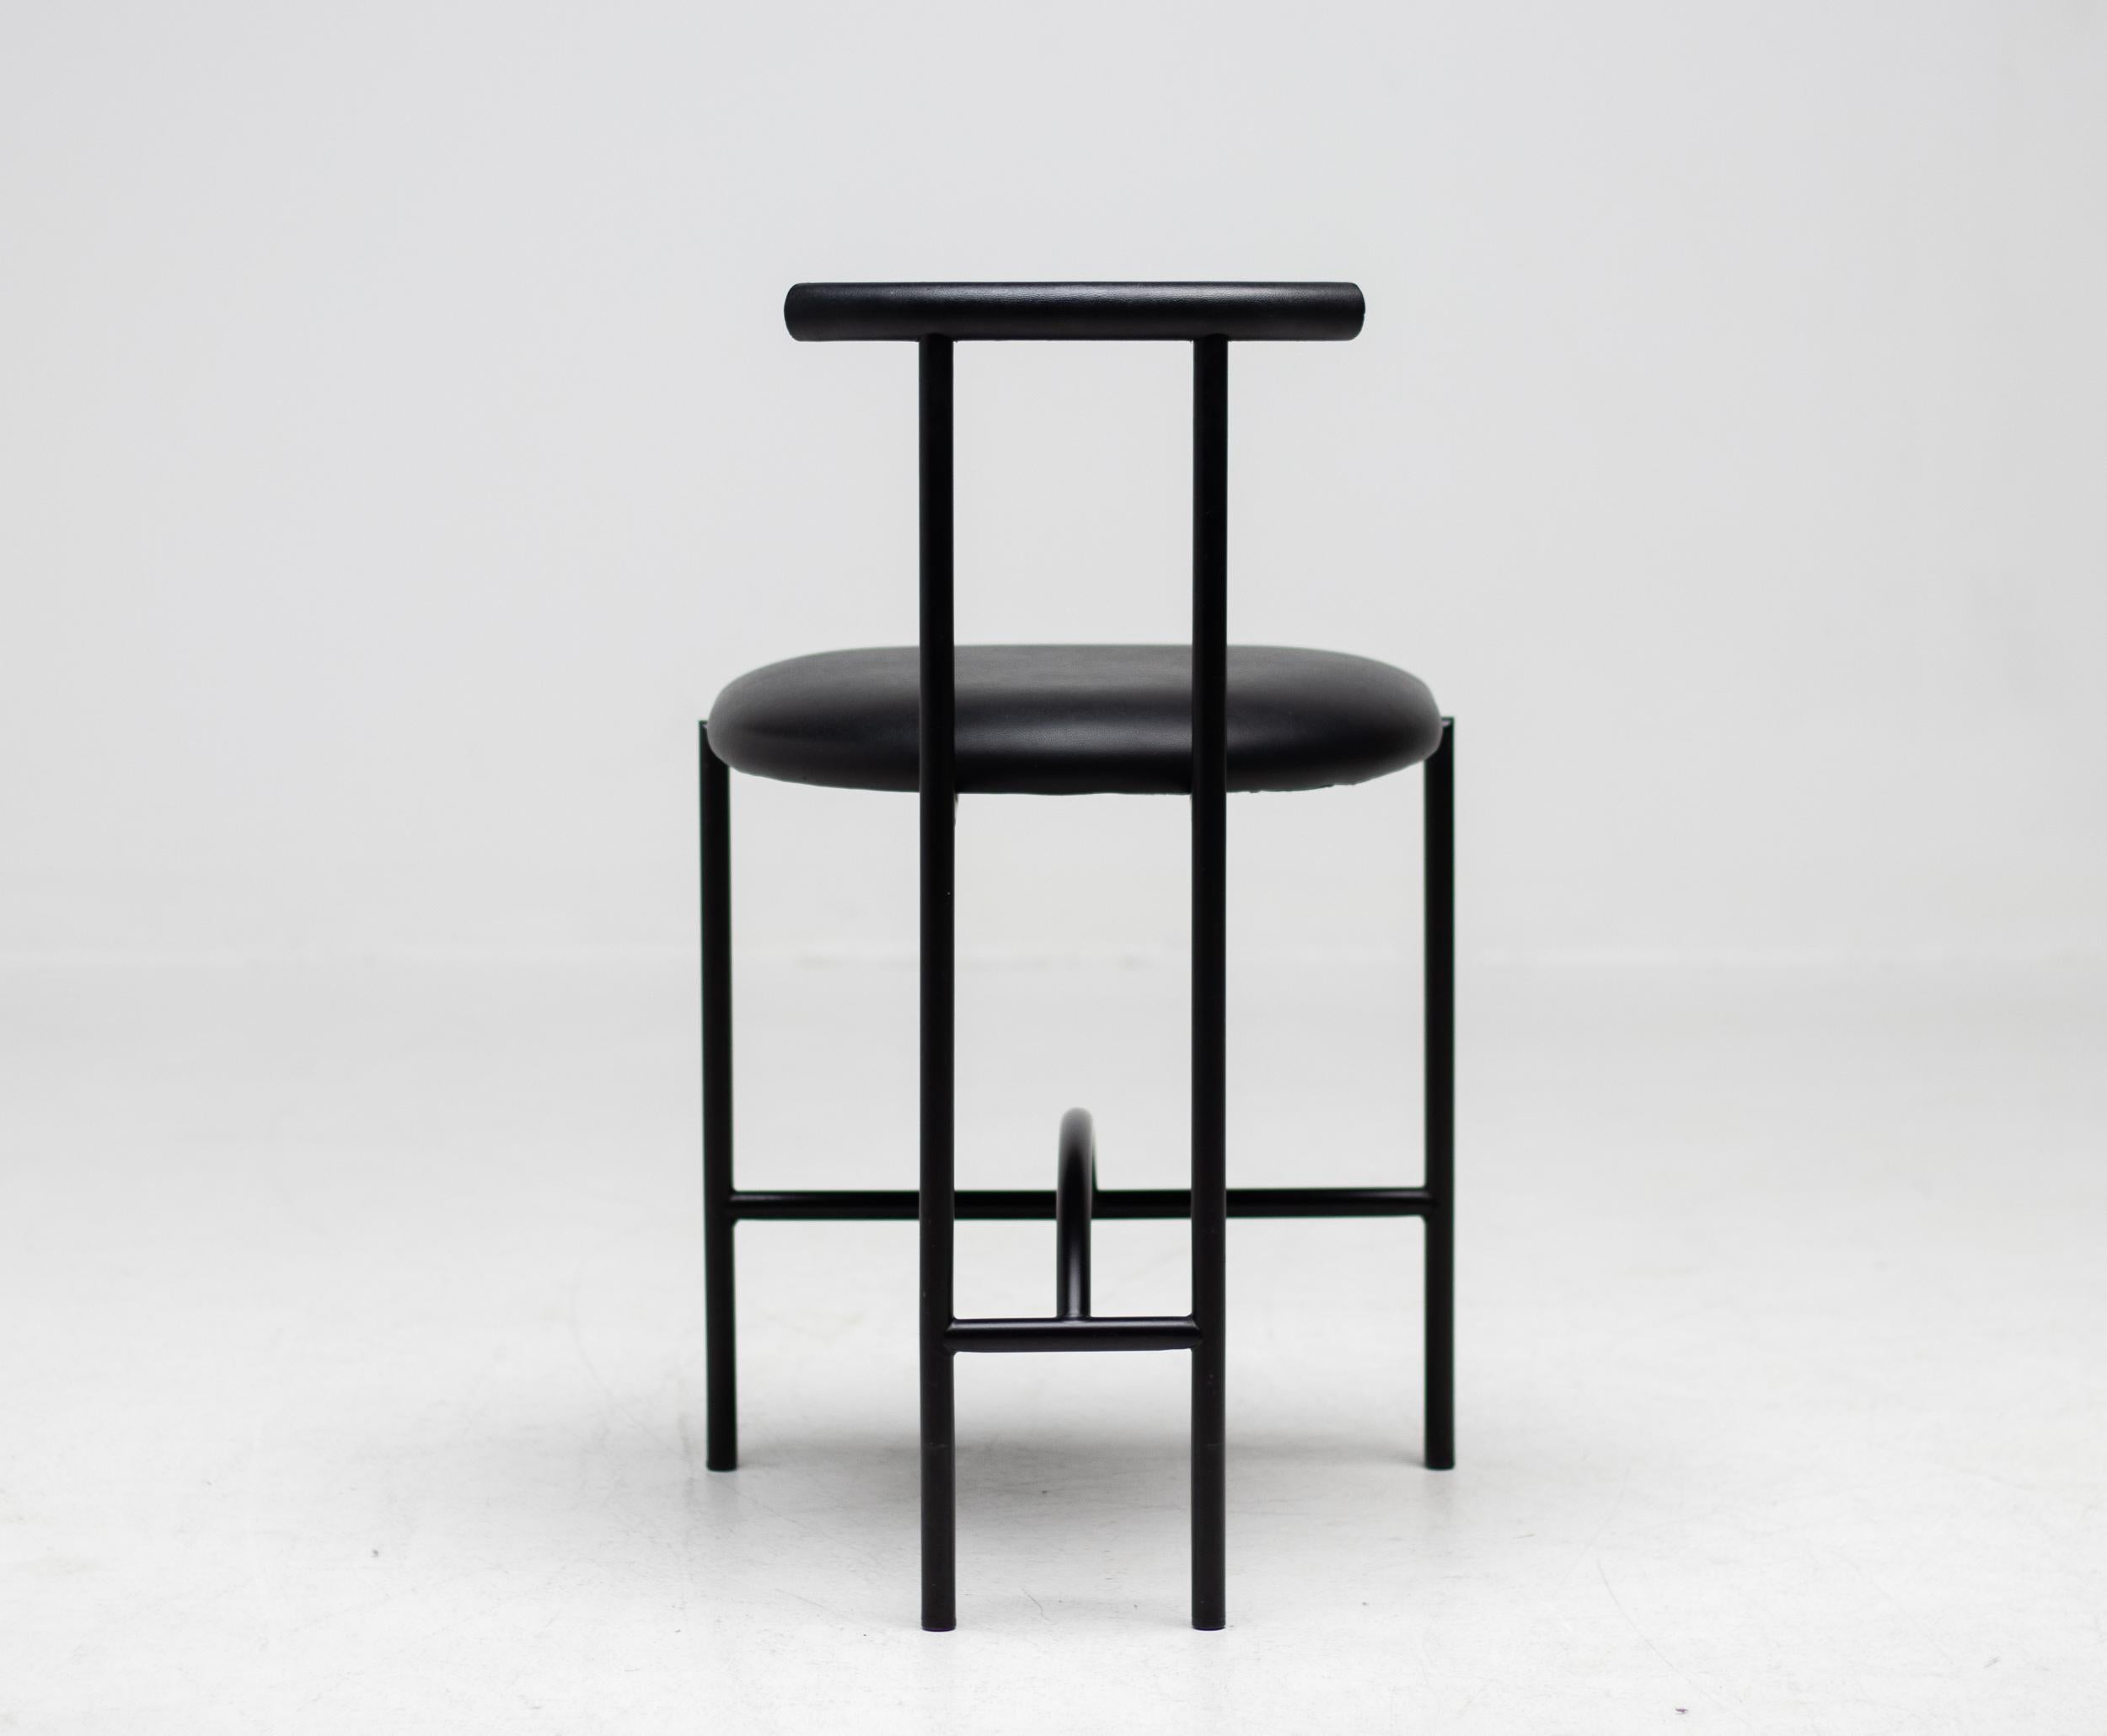 Set of 6 Tokyo chairs by Rodney Kinsman for Bieffeplast, 1985 Black stools mod. Tokyo with chromed steel structure, leather seat and rubber backrest. Produced by Bieffeplast and designed by Rodney Kinsman in the 1985. 
Marked with Bieffeplast label